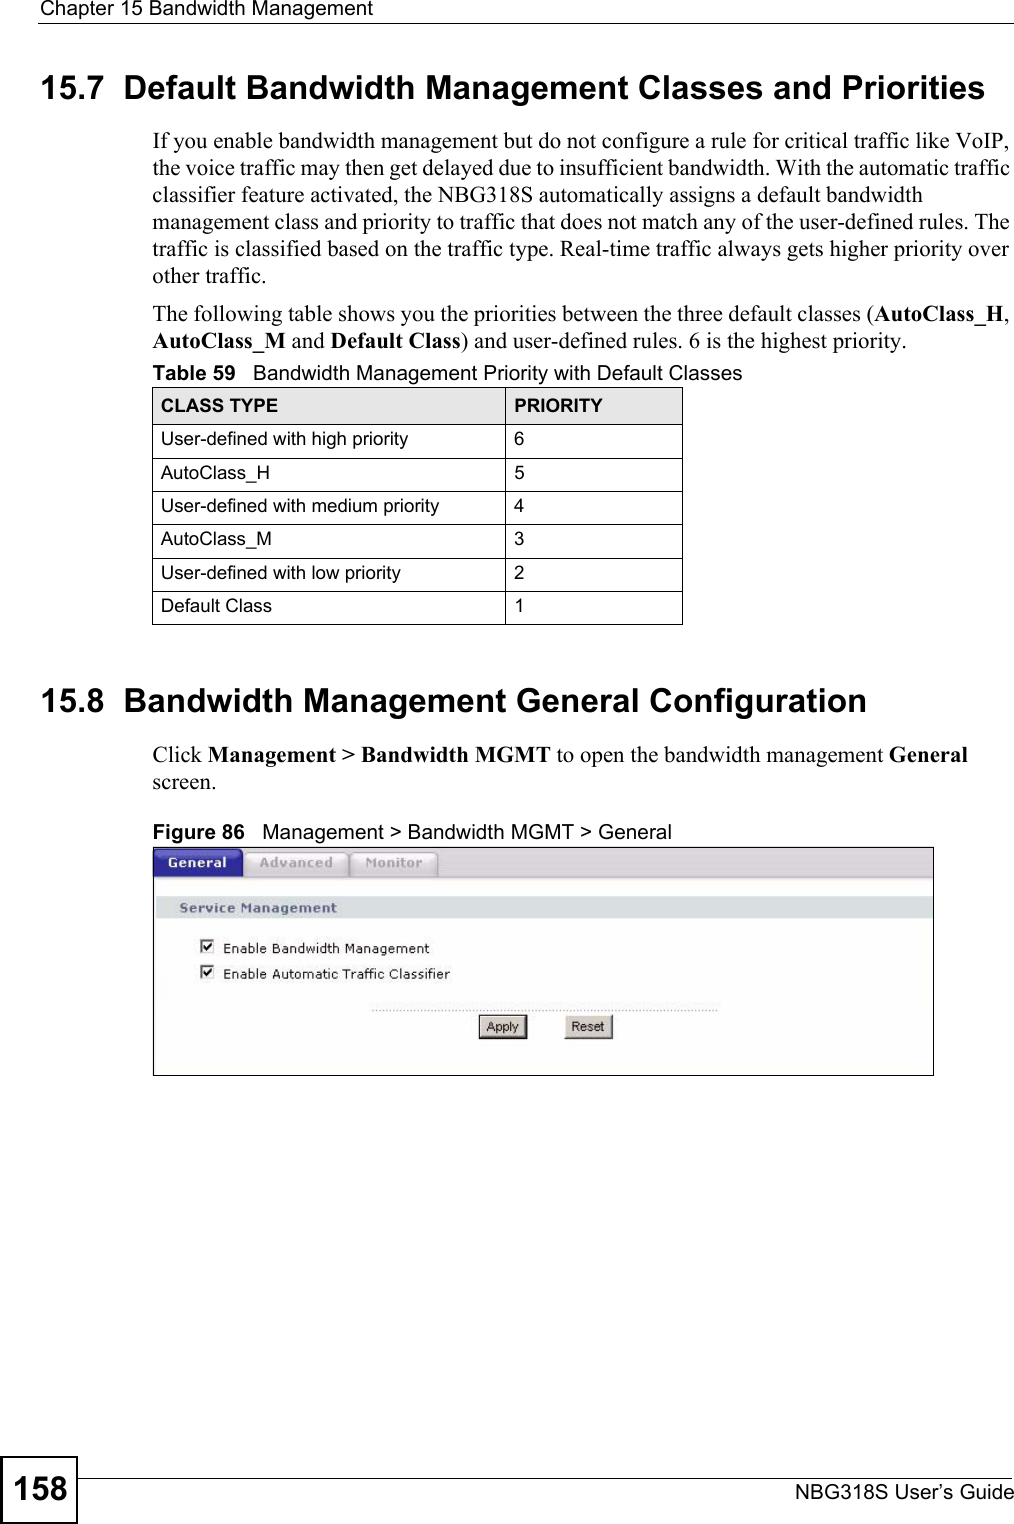 Chapter 15 Bandwidth ManagementNBG318S User’s Guide15815.7  Default Bandwidth Management Classes and PrioritiesIf you enable bandwidth management but do not configure a rule for critical traffic like VoIP, the voice traffic may then get delayed due to insufficient bandwidth. With the automatic traffic classifier feature activated, the NBG318S automatically assigns a default bandwidth management class and priority to traffic that does not match any of the user-defined rules. The traffic is classified based on the traffic type. Real-time traffic always gets higher priority over other traffic. The following table shows you the priorities between the three default classes (AutoClass_H, AutoClass_M and Default Class) and user-defined rules. 6 is the highest priority.15.8  Bandwidth Management General Configuration Click Management &gt; Bandwidth MGMT to open the bandwidth management General screen.Figure 86   Management &gt; Bandwidth MGMT &gt; General   Table 59   Bandwidth Management Priority with Default ClassesCLASS TYPE PRIORITYUser-defined with high priority 6AutoClass_H 5User-defined with medium priority 4AutoClass_M 3User-defined with low priority 2Default Class 1